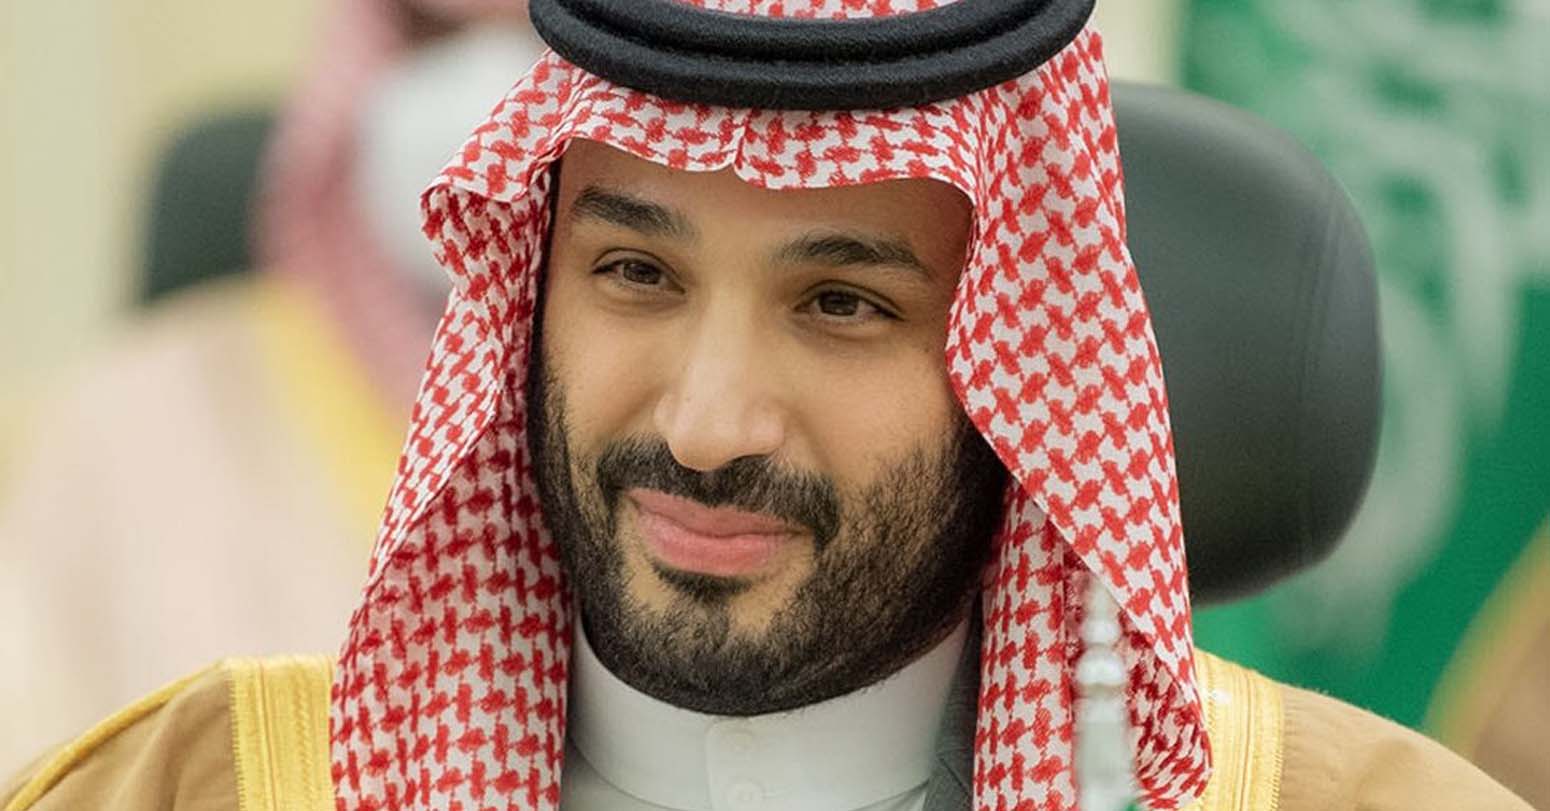 “Saudi Stands By Palestinians”: Crown Prince Expresses Support As War Escalates